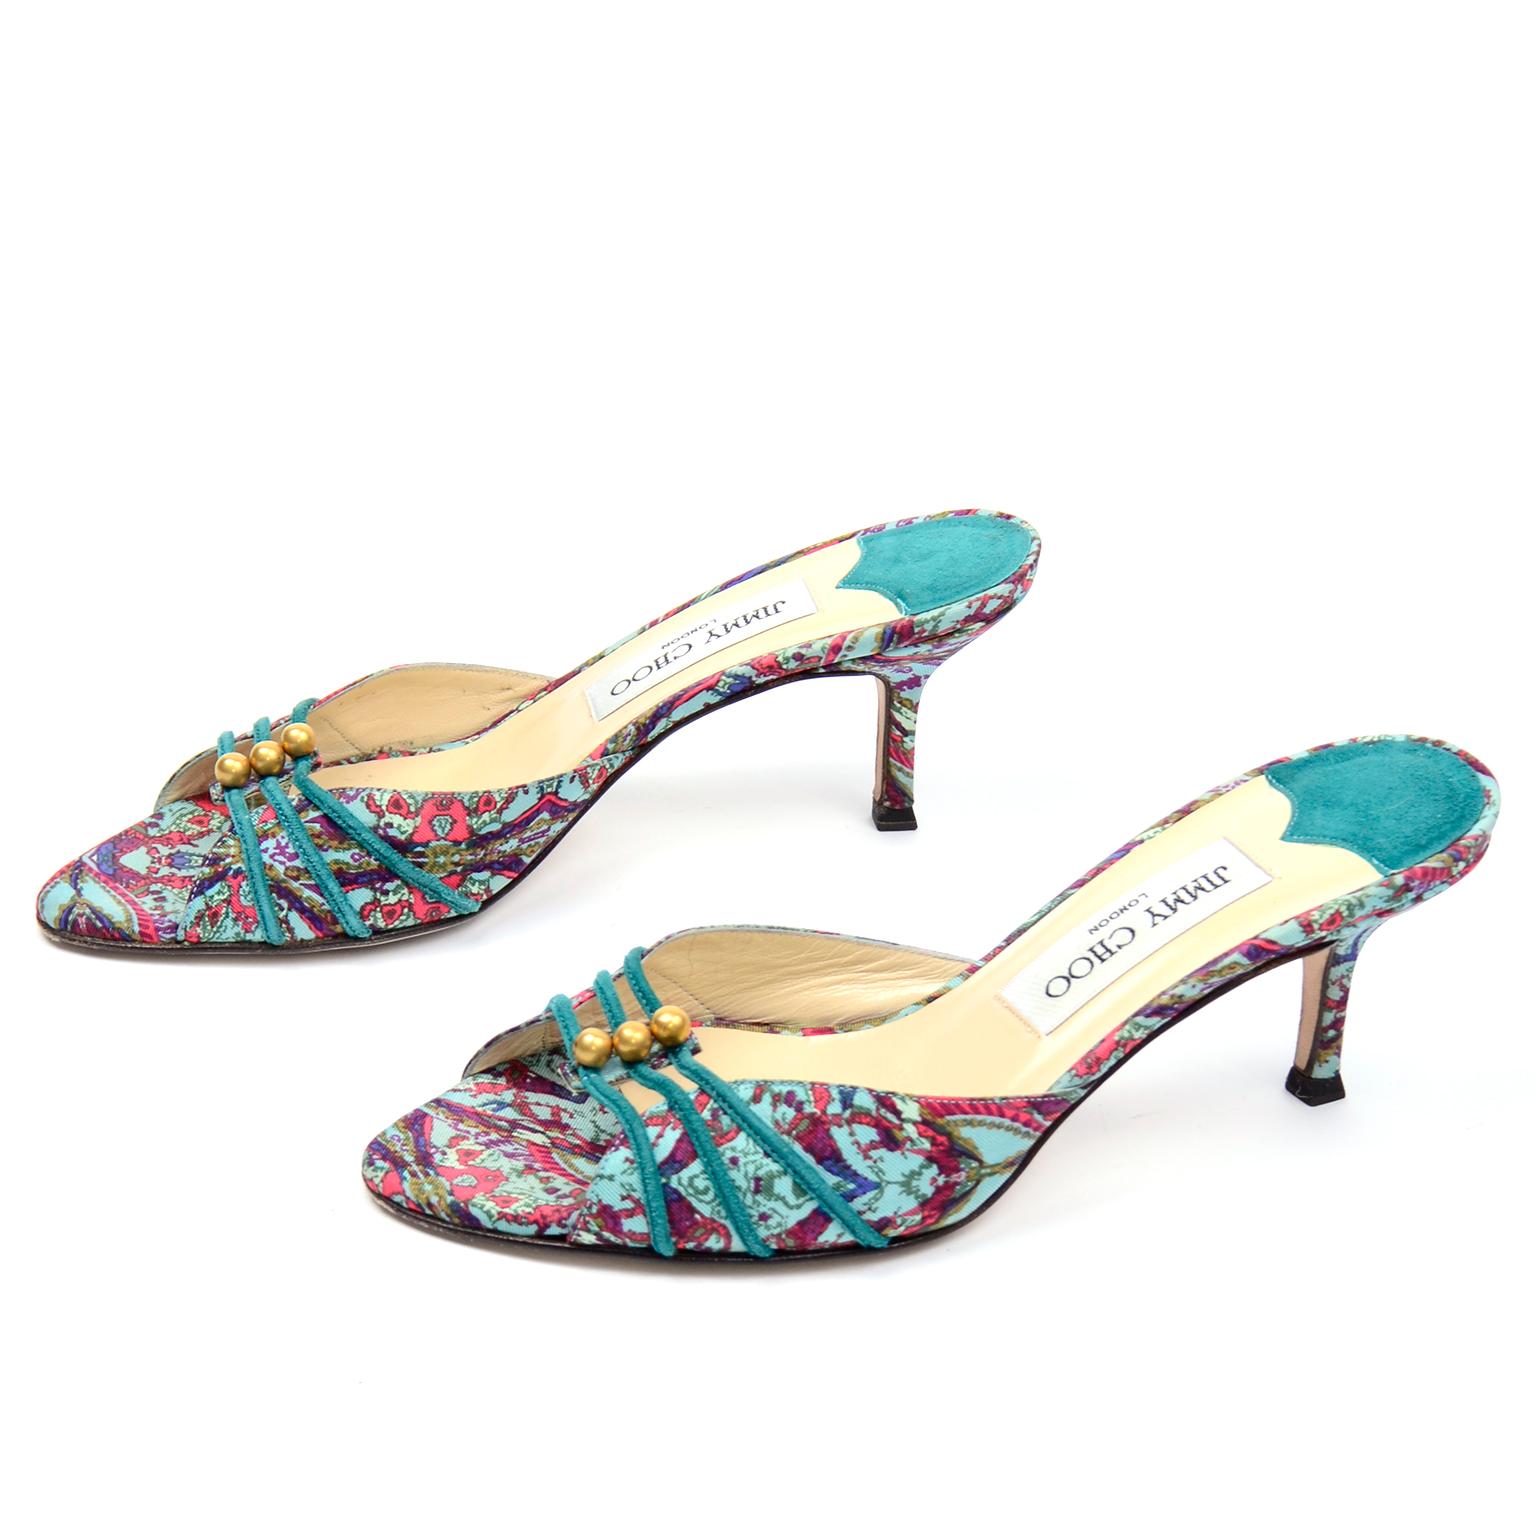 Jimmy Choo London Colorful Mules Shoes in Turquoise Print W Heels & Gold Beads In Excellent Condition In Portland, OR